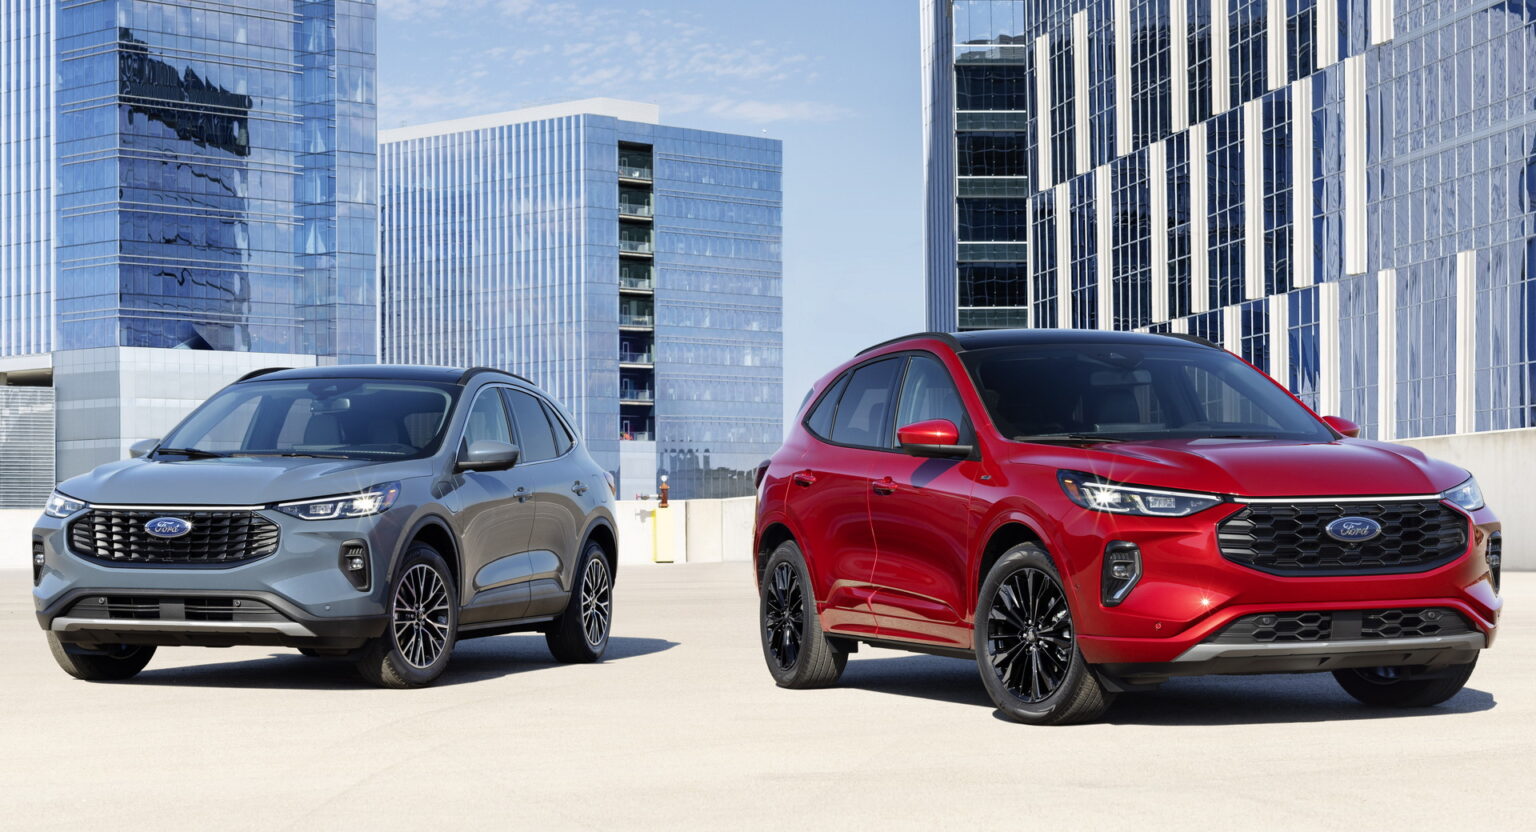 Facelifted 2023 Ford Escape Arrives With More Appealing Styling, Sporty